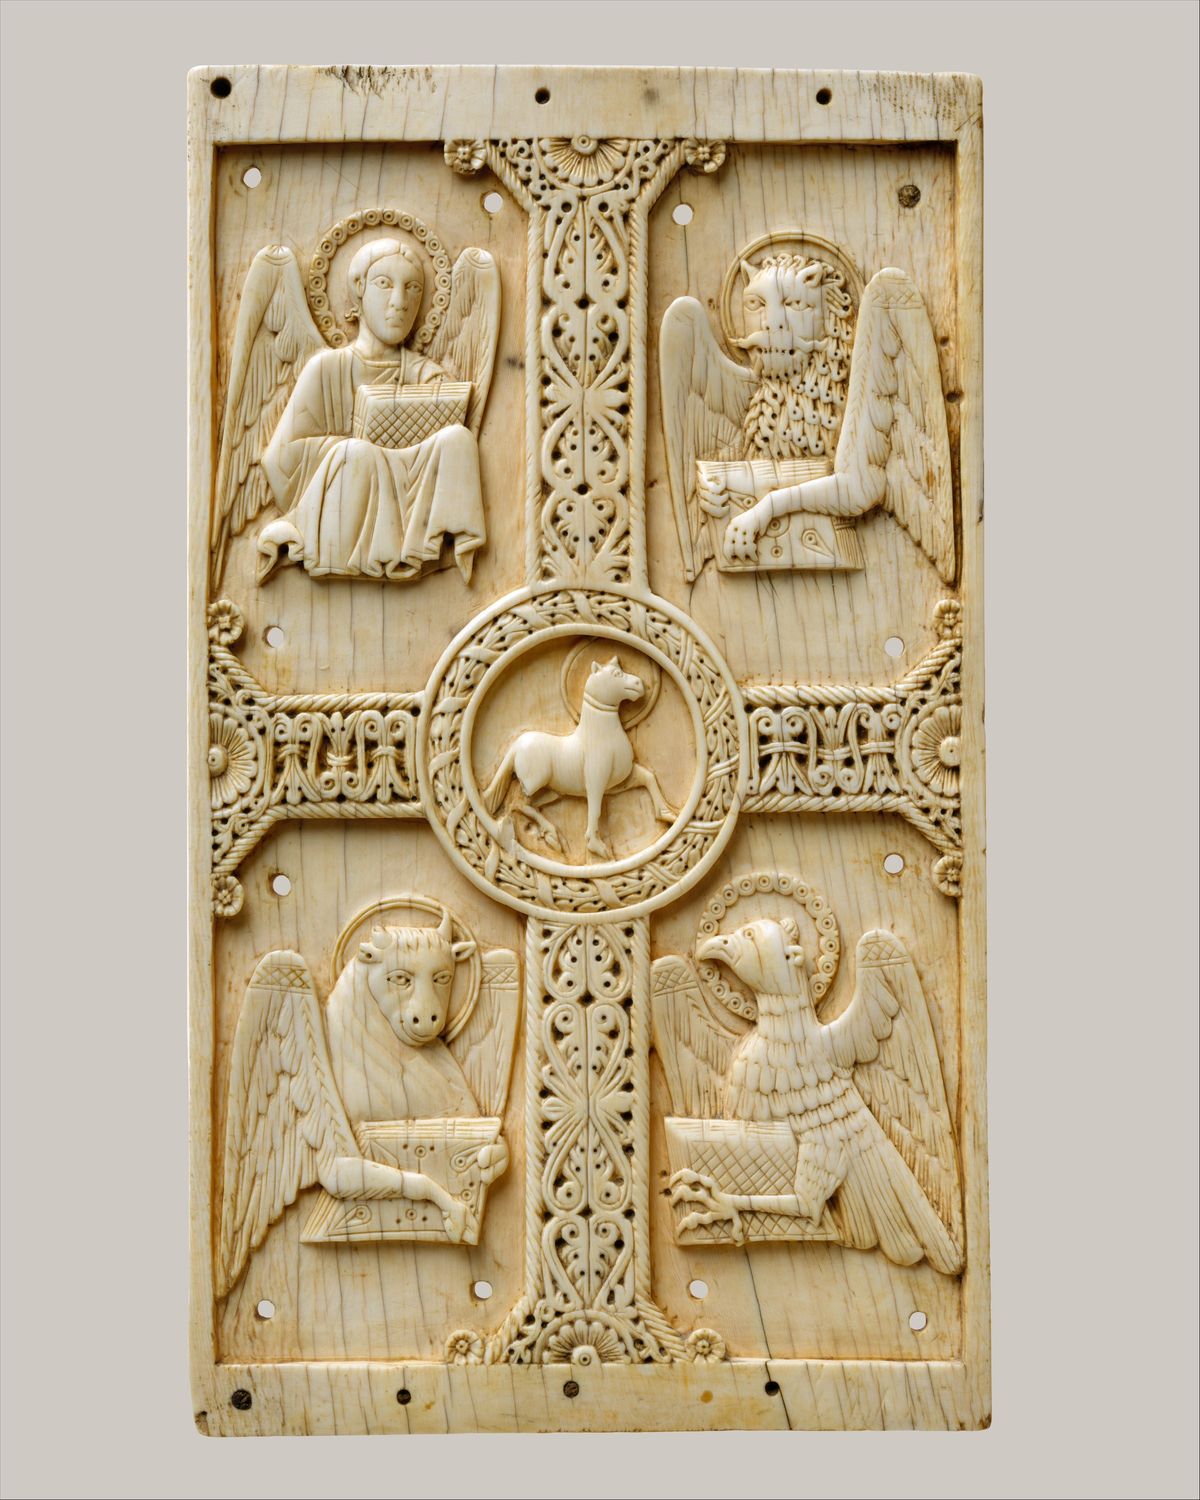 Plaque with Agnus Dei on a Cross between Emblems of the Four Evangelists (1000-1050, South Italian) - Catholic Stock Photo